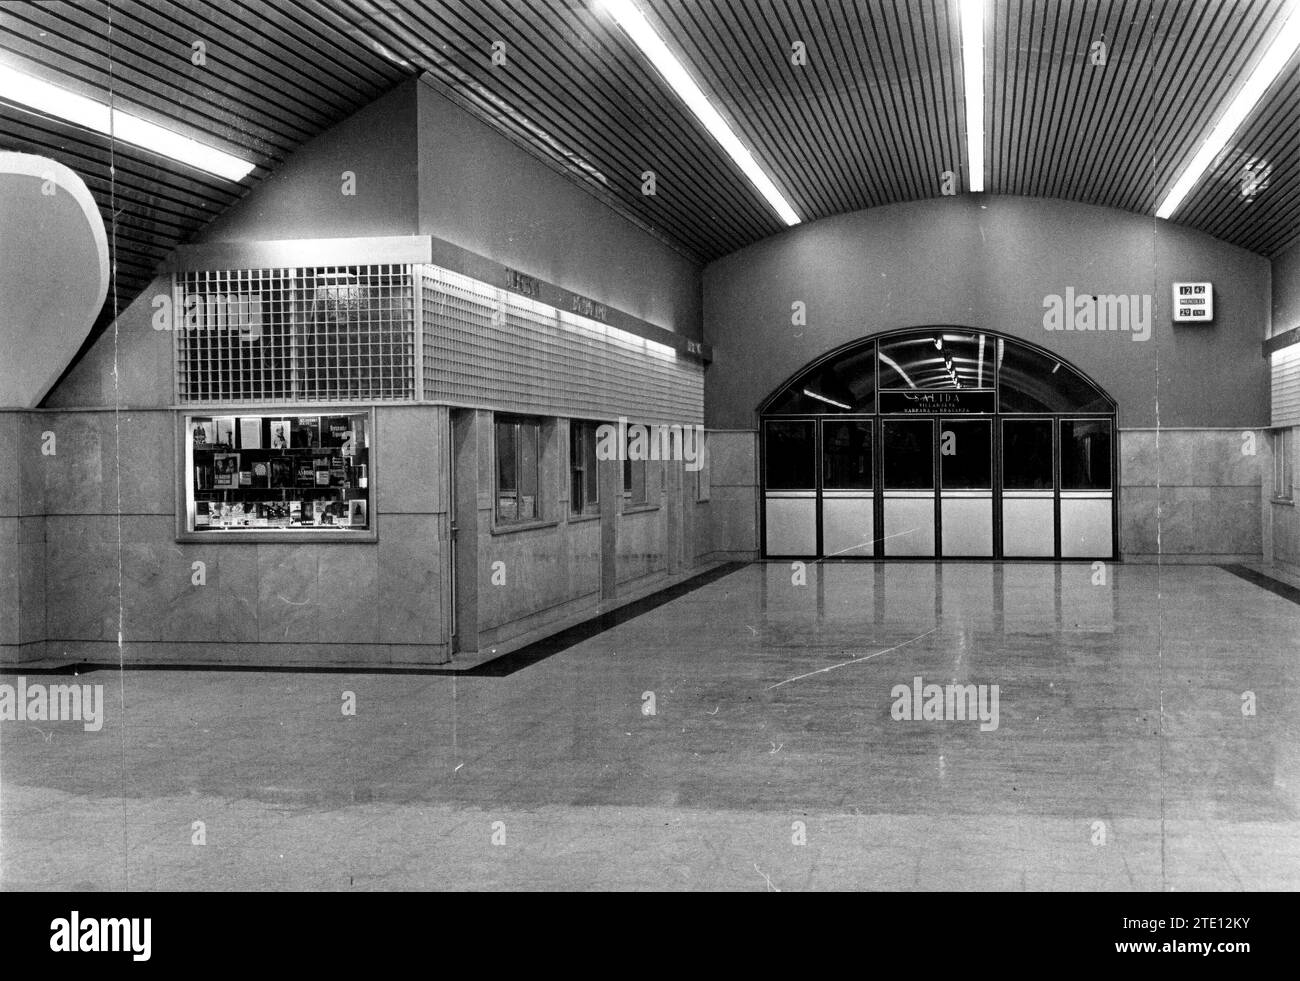 01/28/1969. Lobby of the Recoletos stop, built by the Ministry of Public Works for Renfe Services. The ribbon was cut by the mayor of Madrid, Mr. Carlos Arias Navarro, accompanied by the general director of Land Transport, Mr. Santiago Cruylles, and the vice president of the board of directors of Renfe, Mr. Alfredo Moreno, among other personalities. Credit: Album / Archivo ABC / Manuel Sanz Bermejo Stock Photo